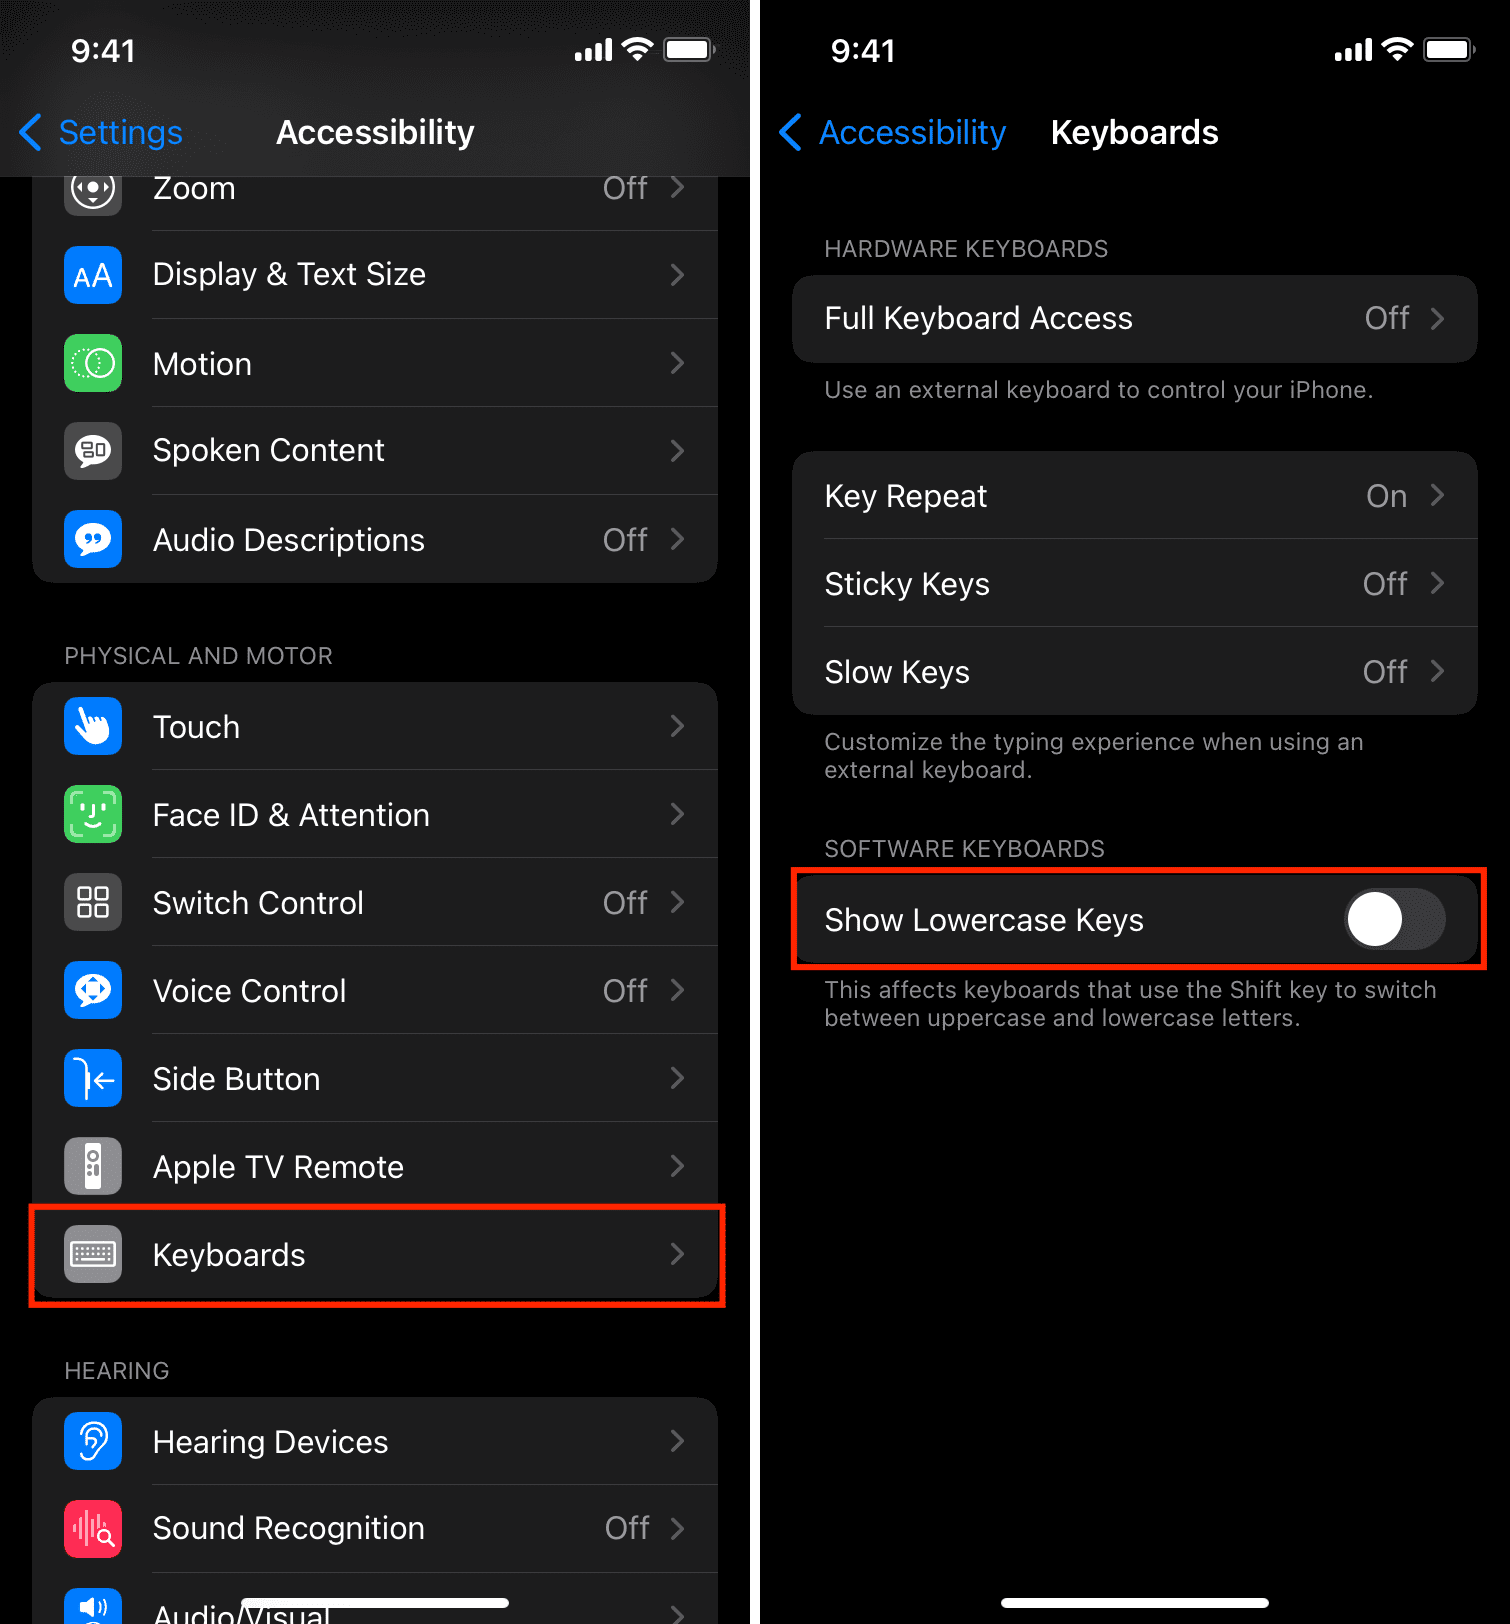 Show Lowercase Keys in iPhone accessibility settings